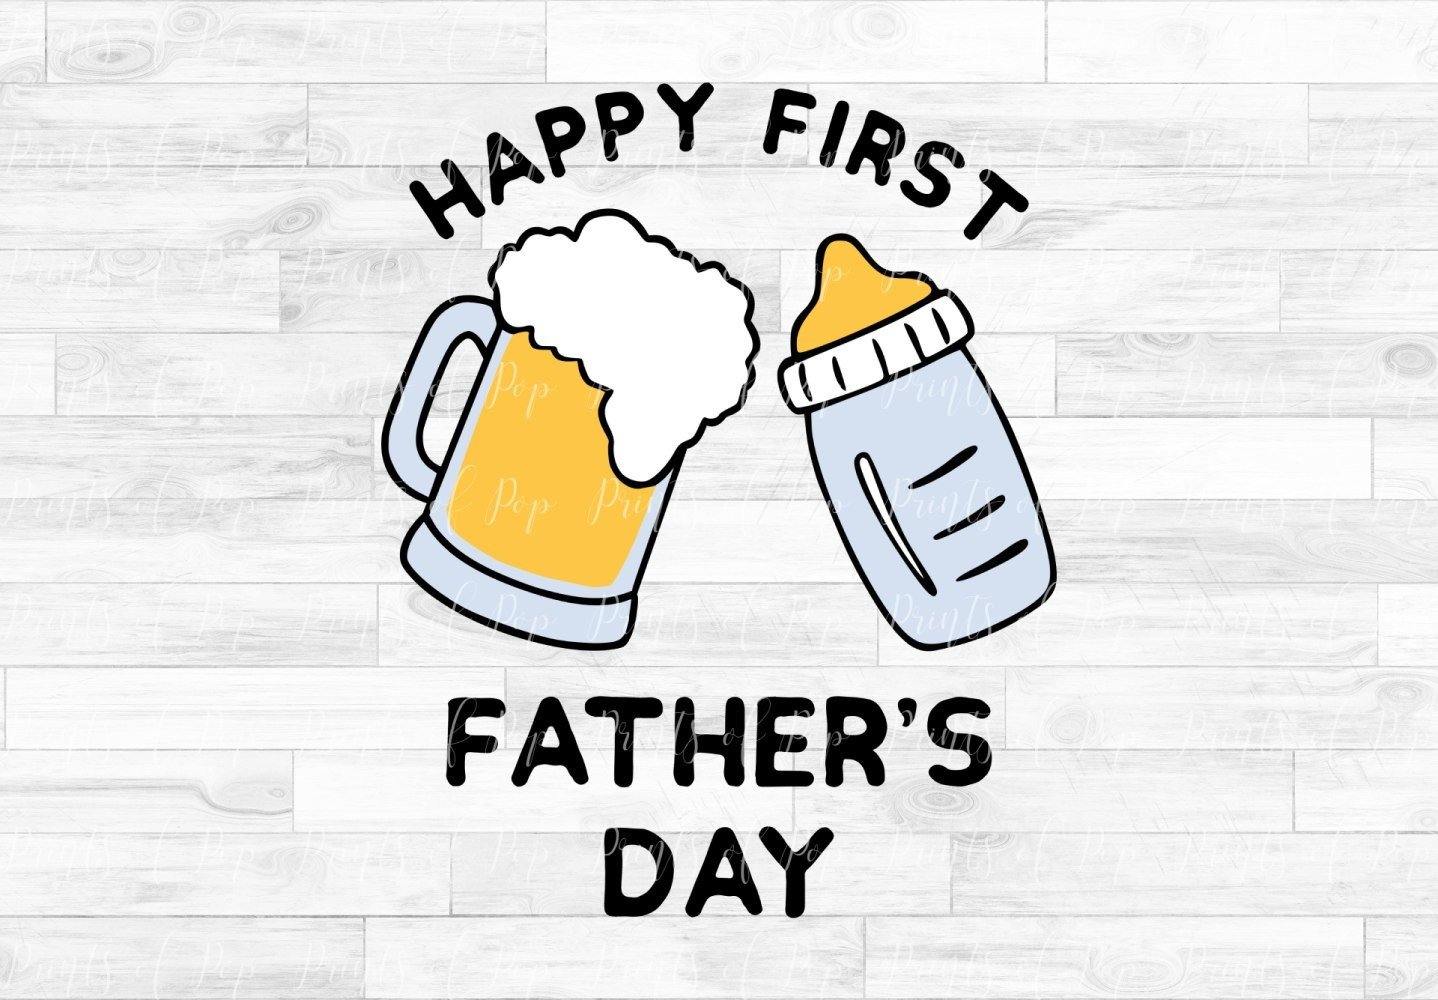 Download Happy First Father's Day svg dxf png - PrintsOfPop